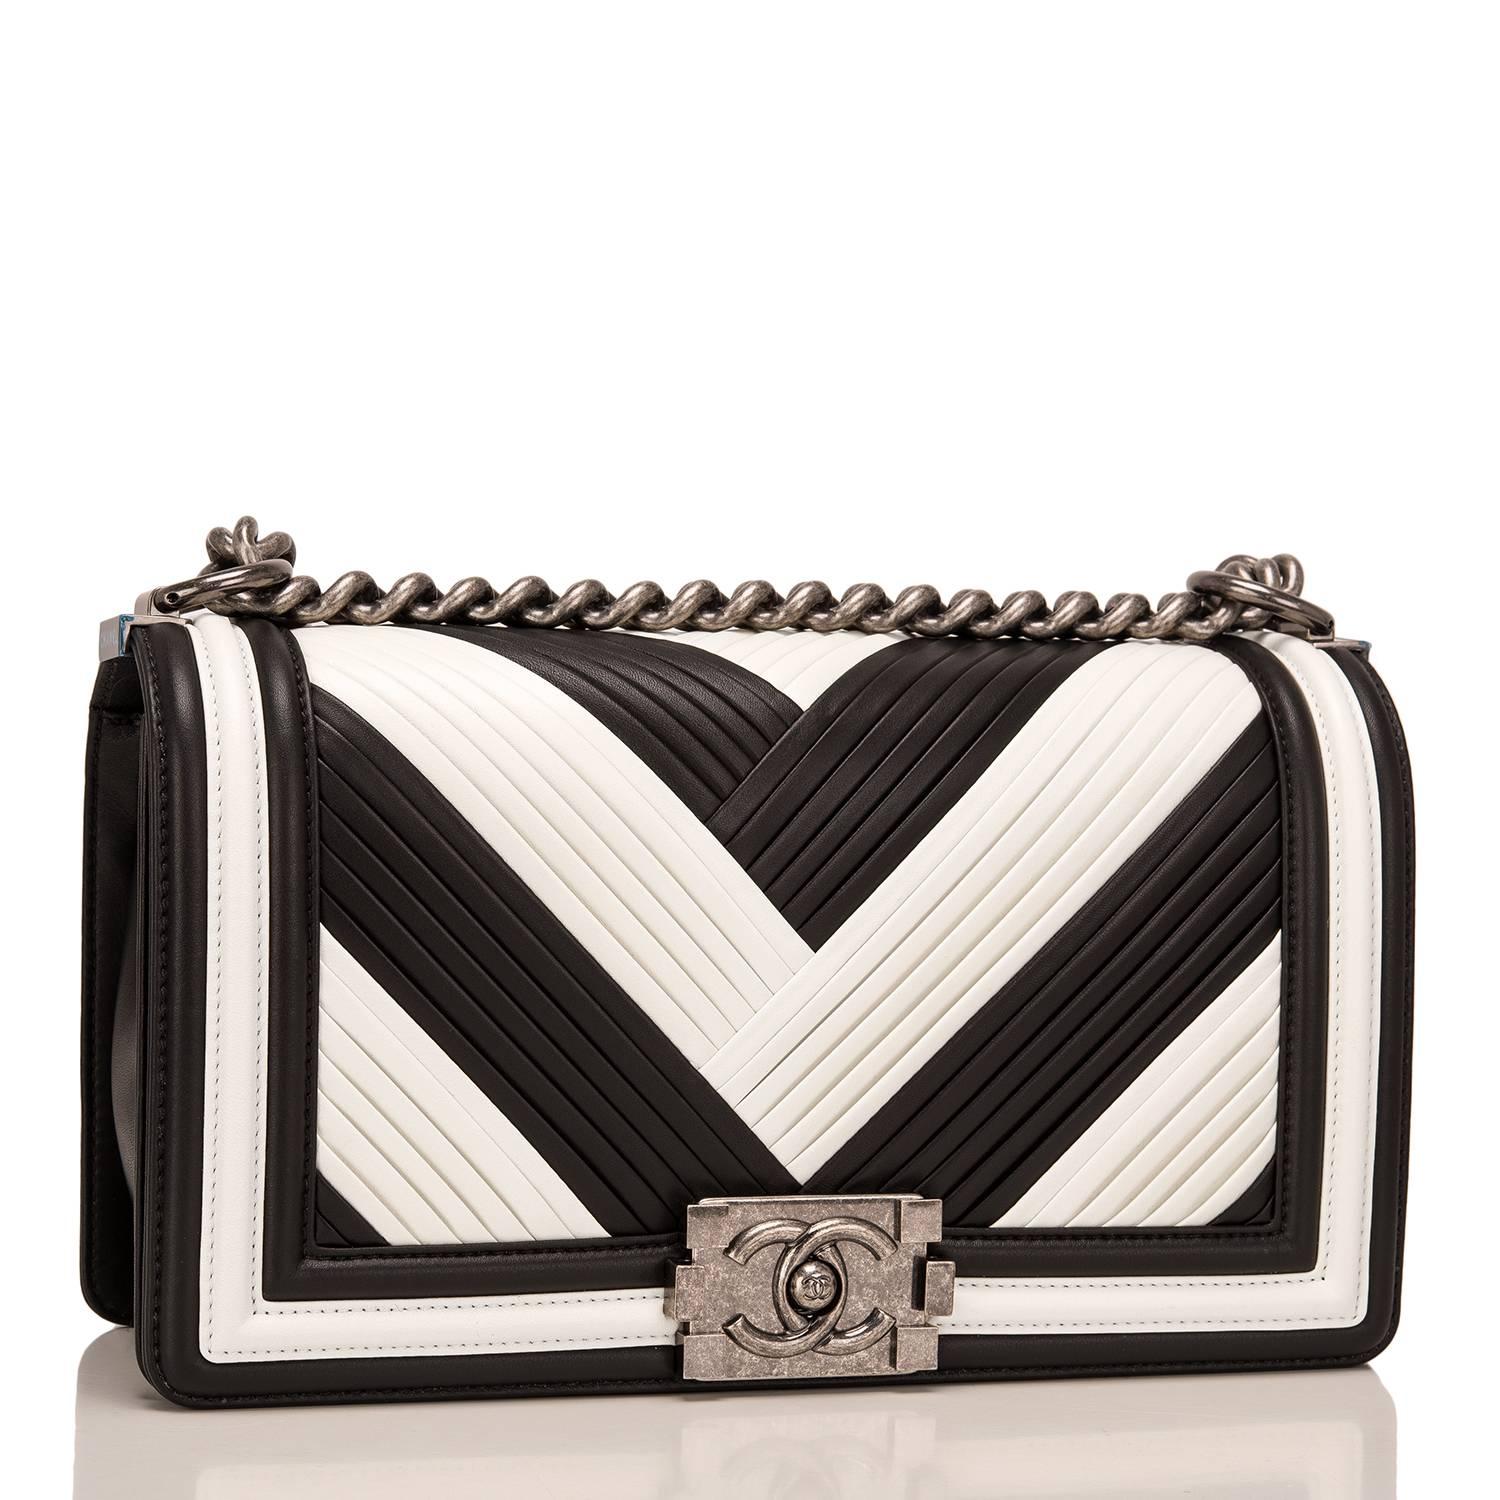 Chanel Paris In Rome Metiers d'Art Medium Boy bag of black and white pleated calfskin with ruthenium hardware.

This limited edition Chanel bag is in the classic Boy style with a full front flap with the Boy signature CC push lock closure detail